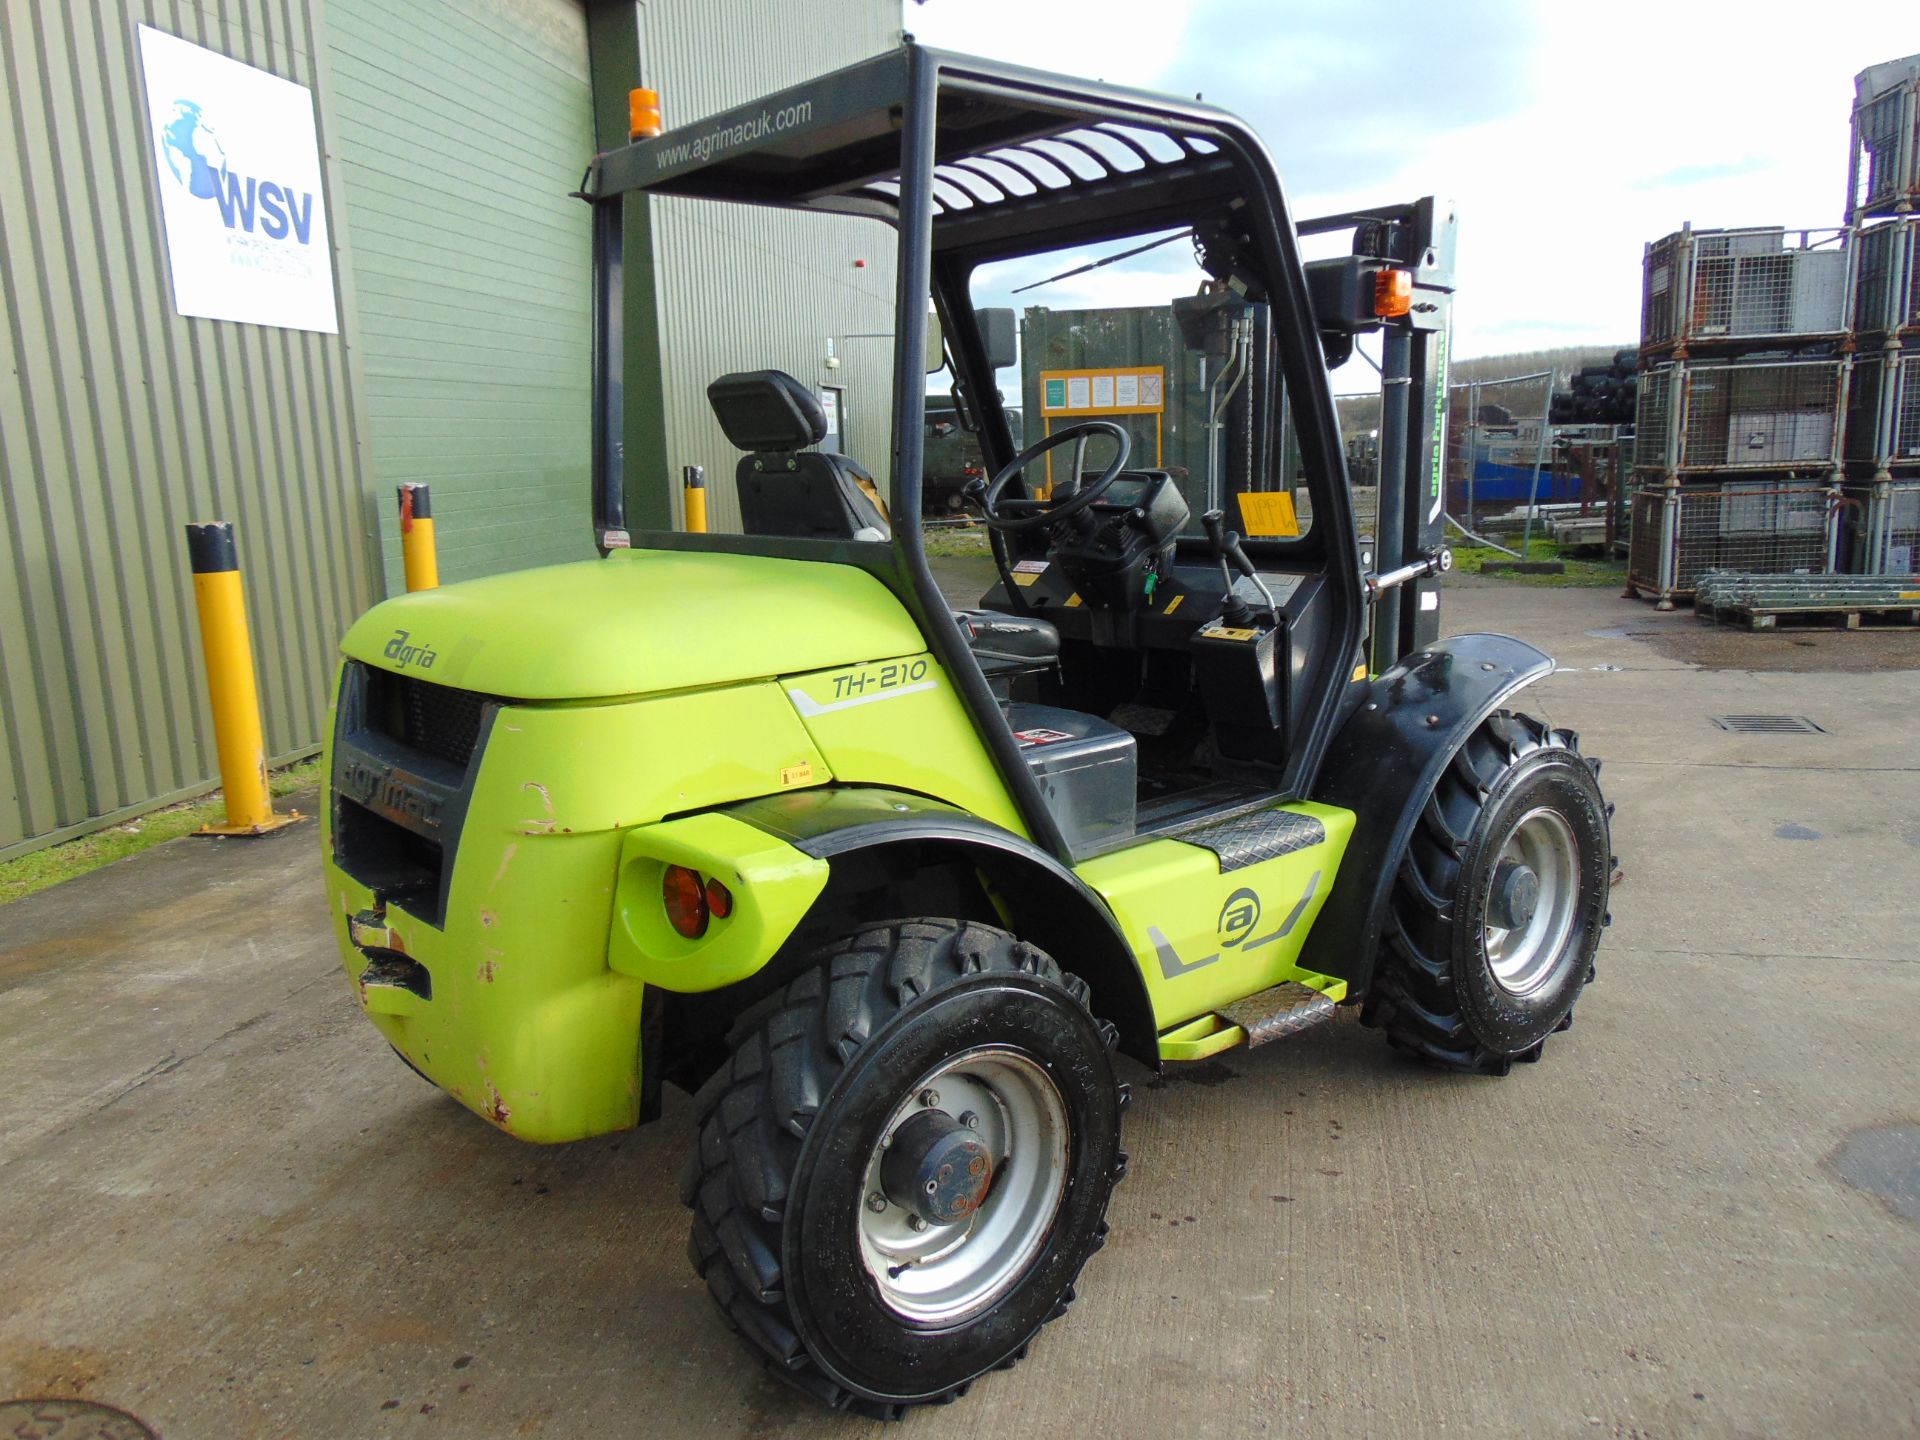 2011 Agrimac Agria TH210 4x4 Rough Terrain Diesel Forklift ONLY 1,918 HOURS!!! - Image 7 of 30